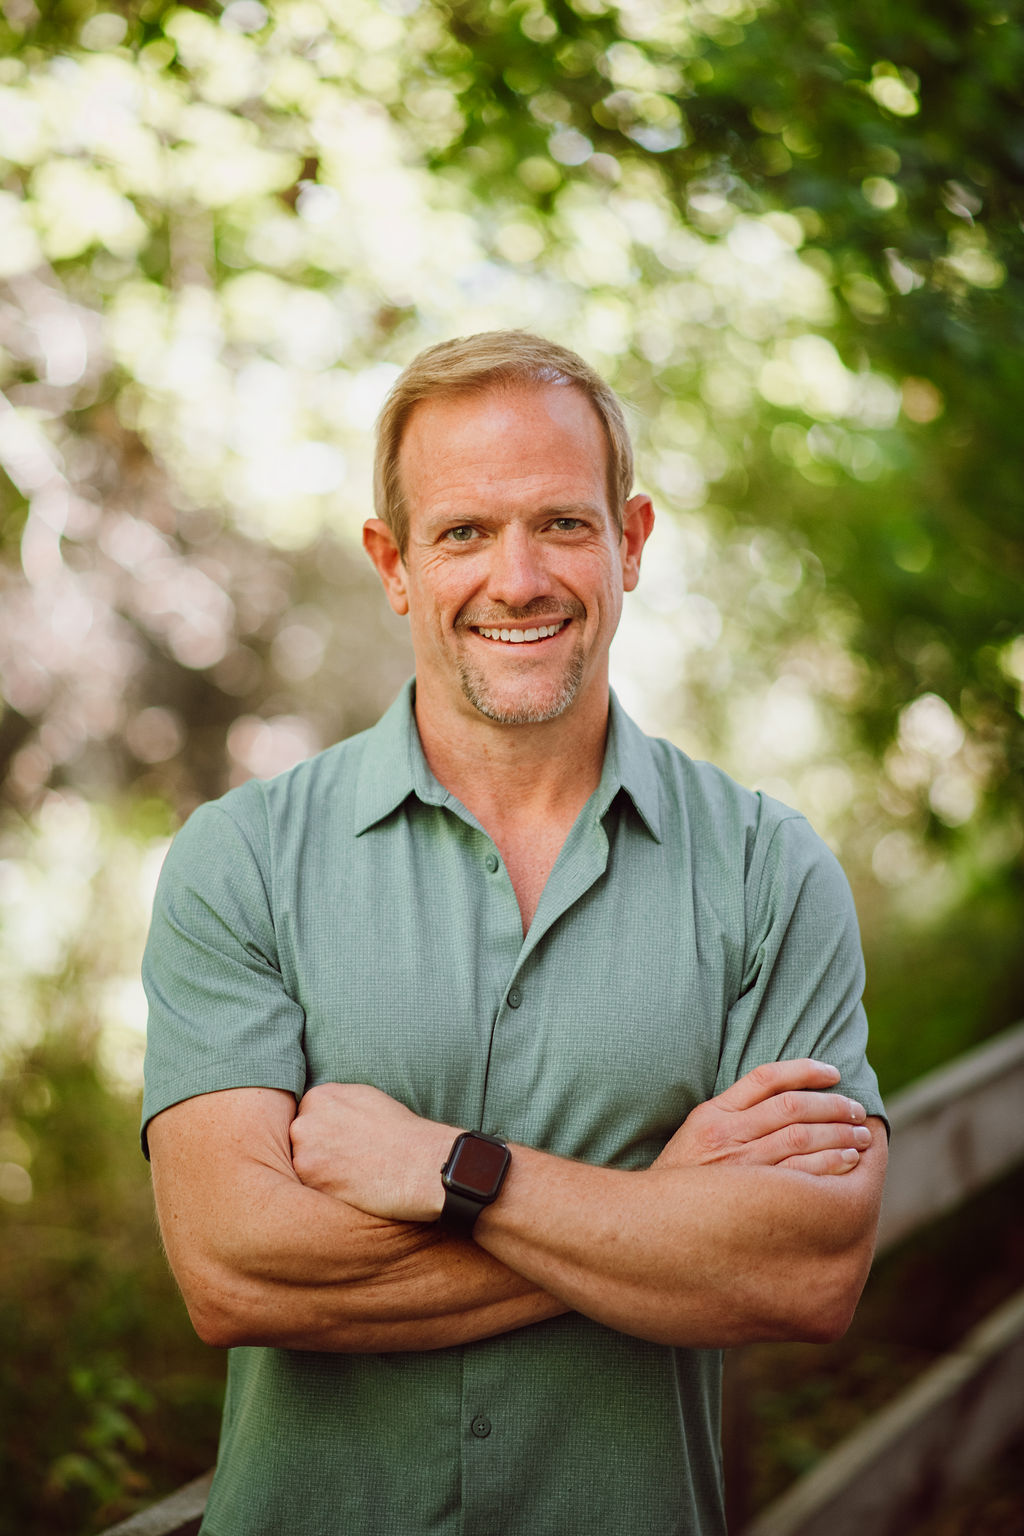 headshot of brillity digital ceo and visionary, derrick kuhn with arms crossed in an outdoor setting, dappled sunlight showing through the blurred background